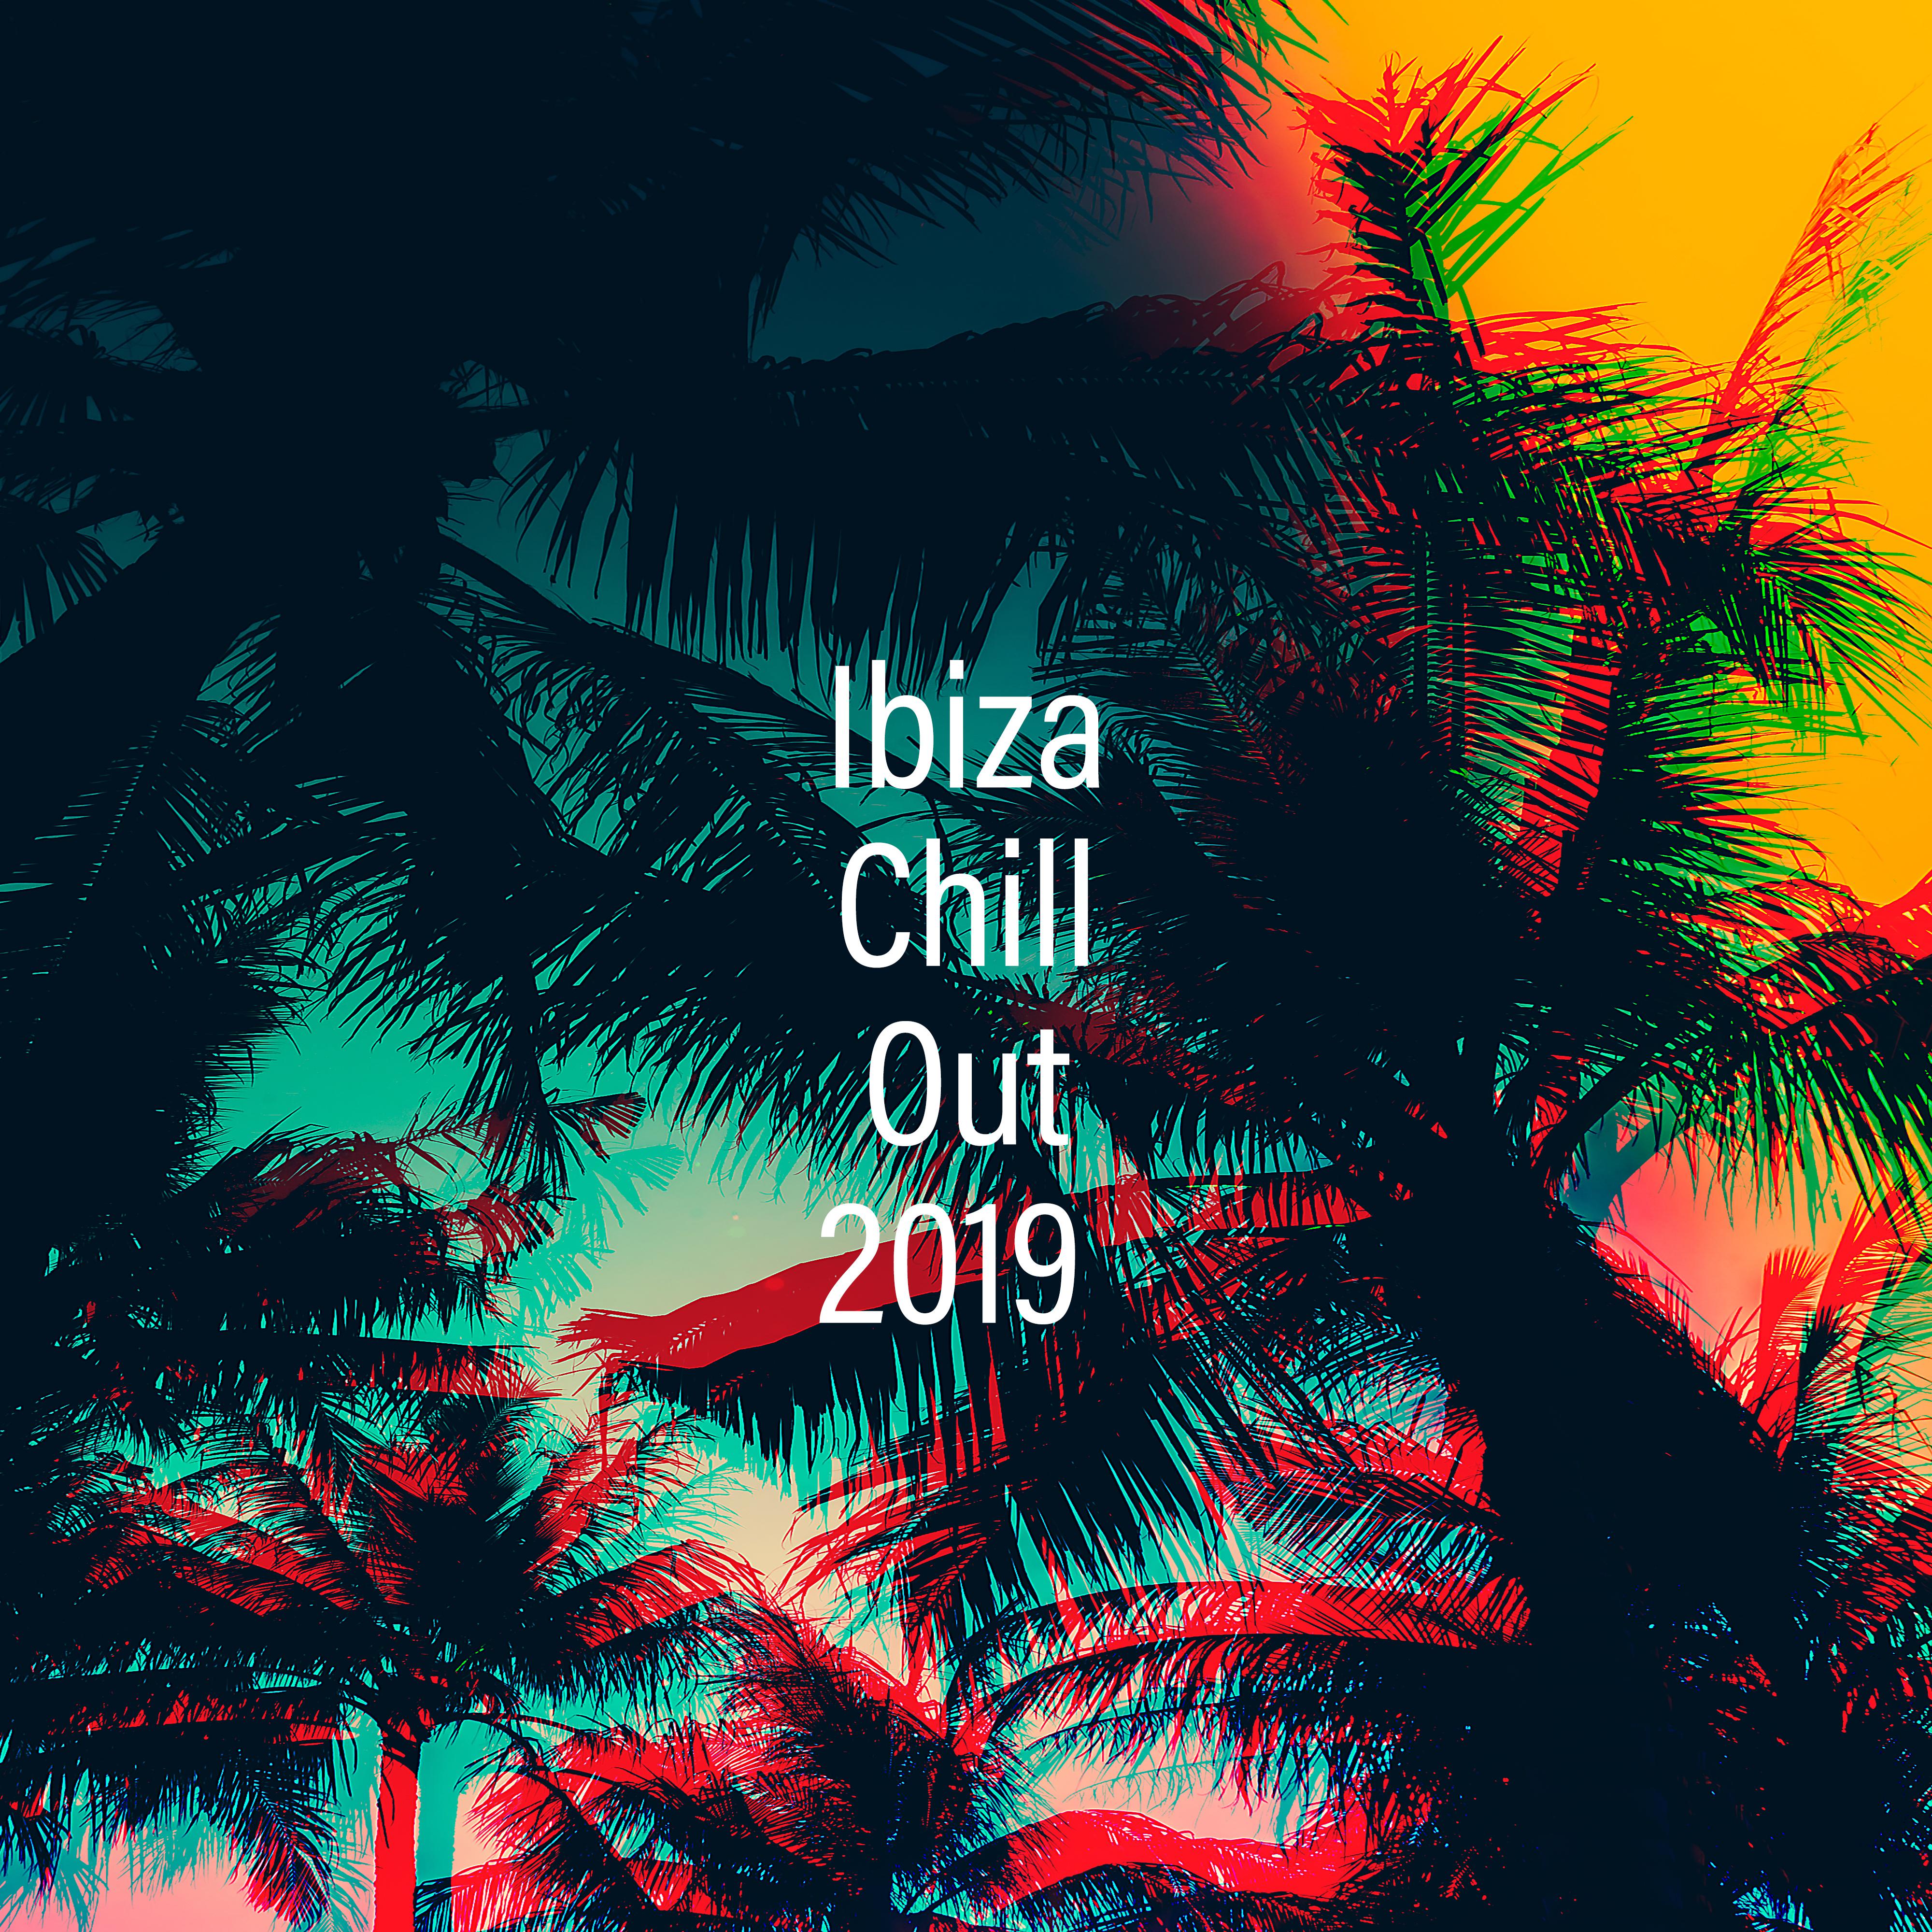 Ibiza Chill Out 2019  Music Zone, Summer 2019, Deep Chillout Lounge, Beach Music